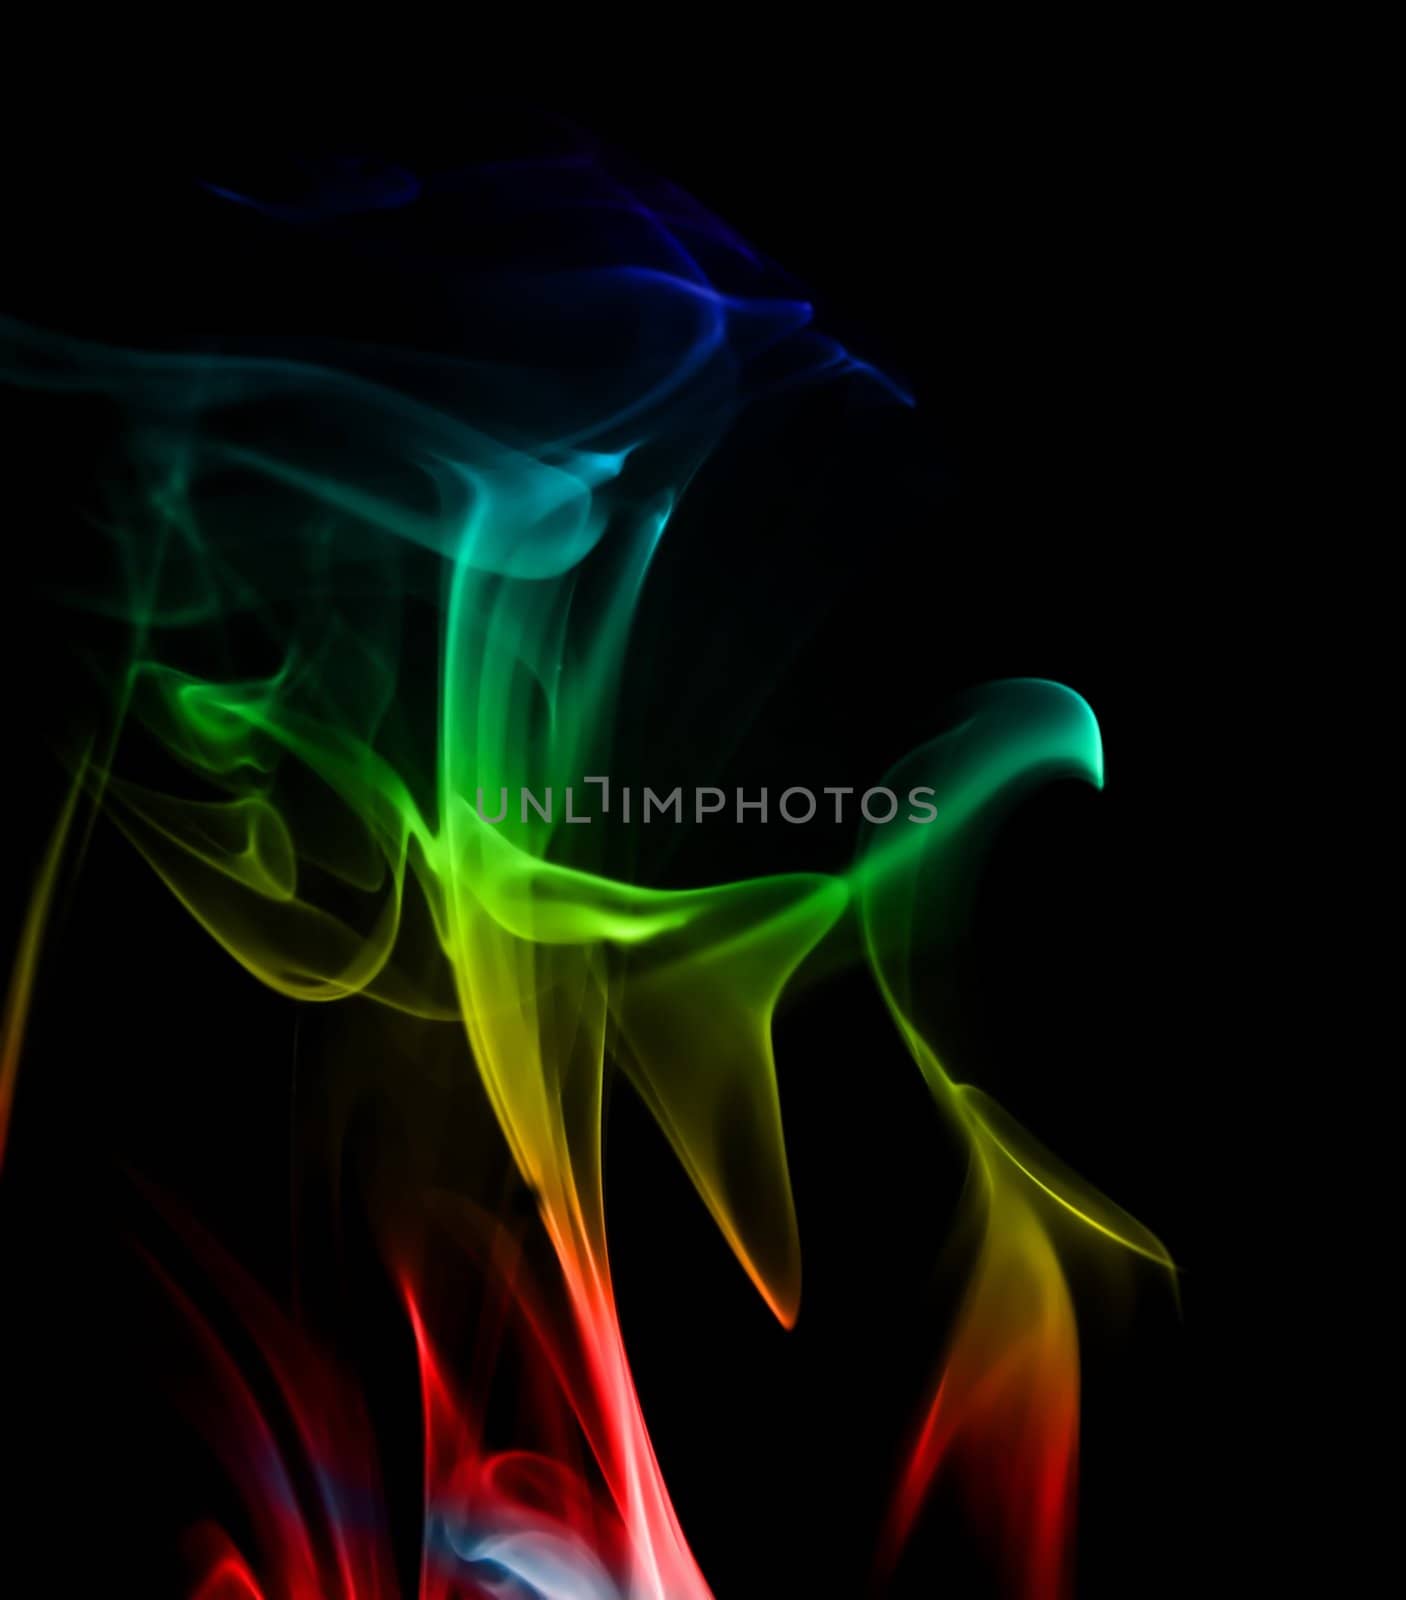 Multicolored smoke on a black background